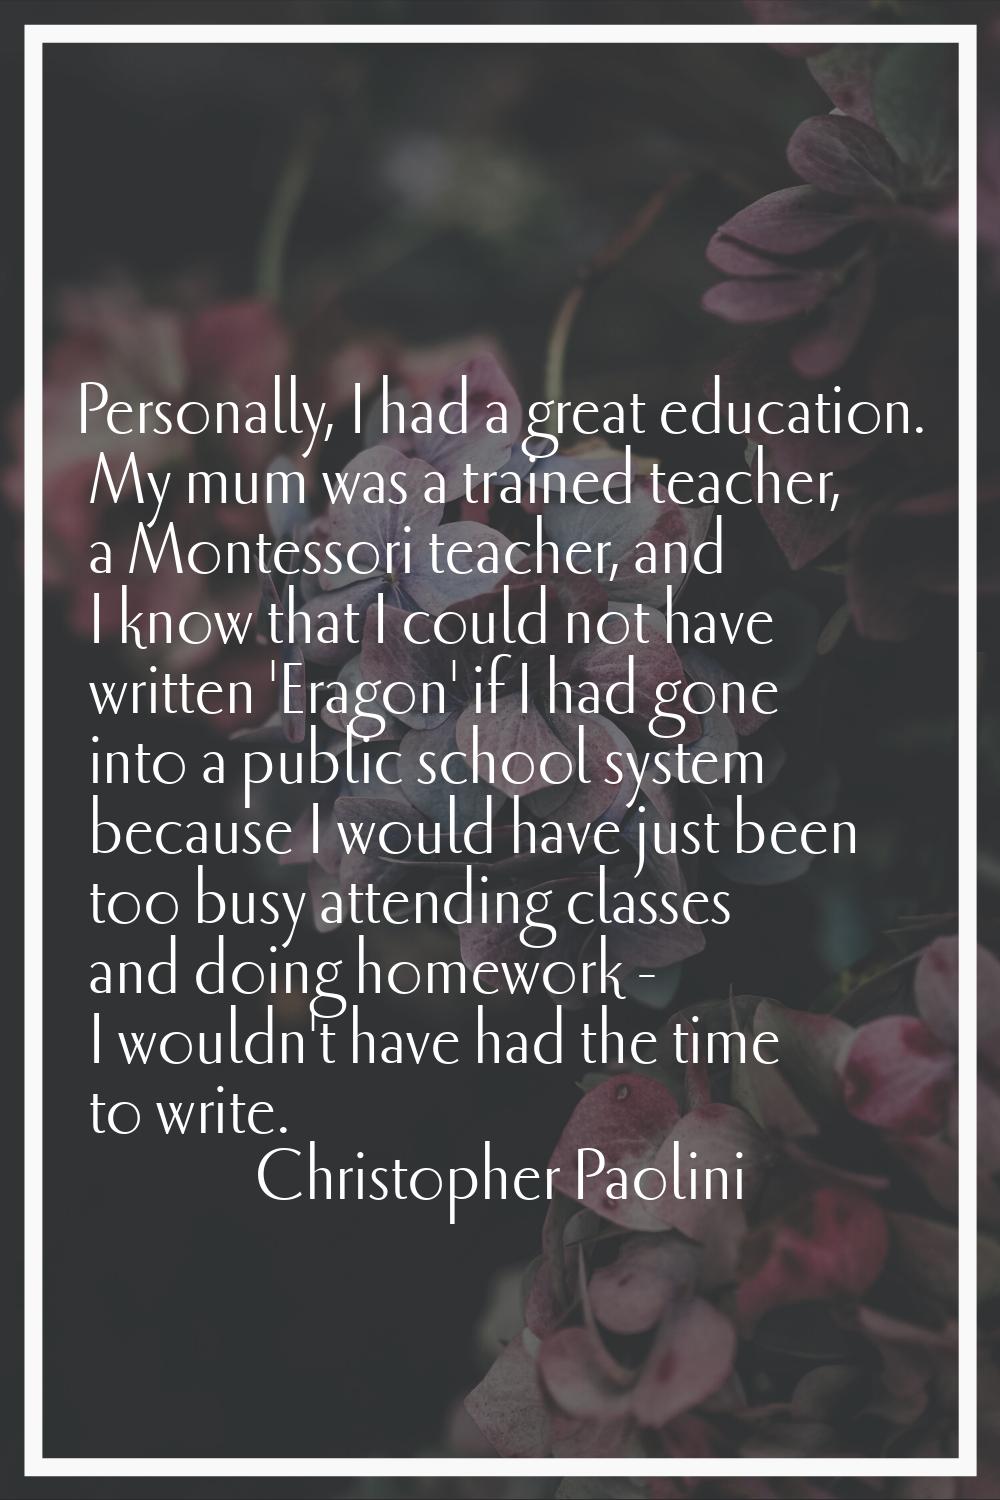 Personally, I had a great education. My mum was a trained teacher, a Montessori teacher, and I know